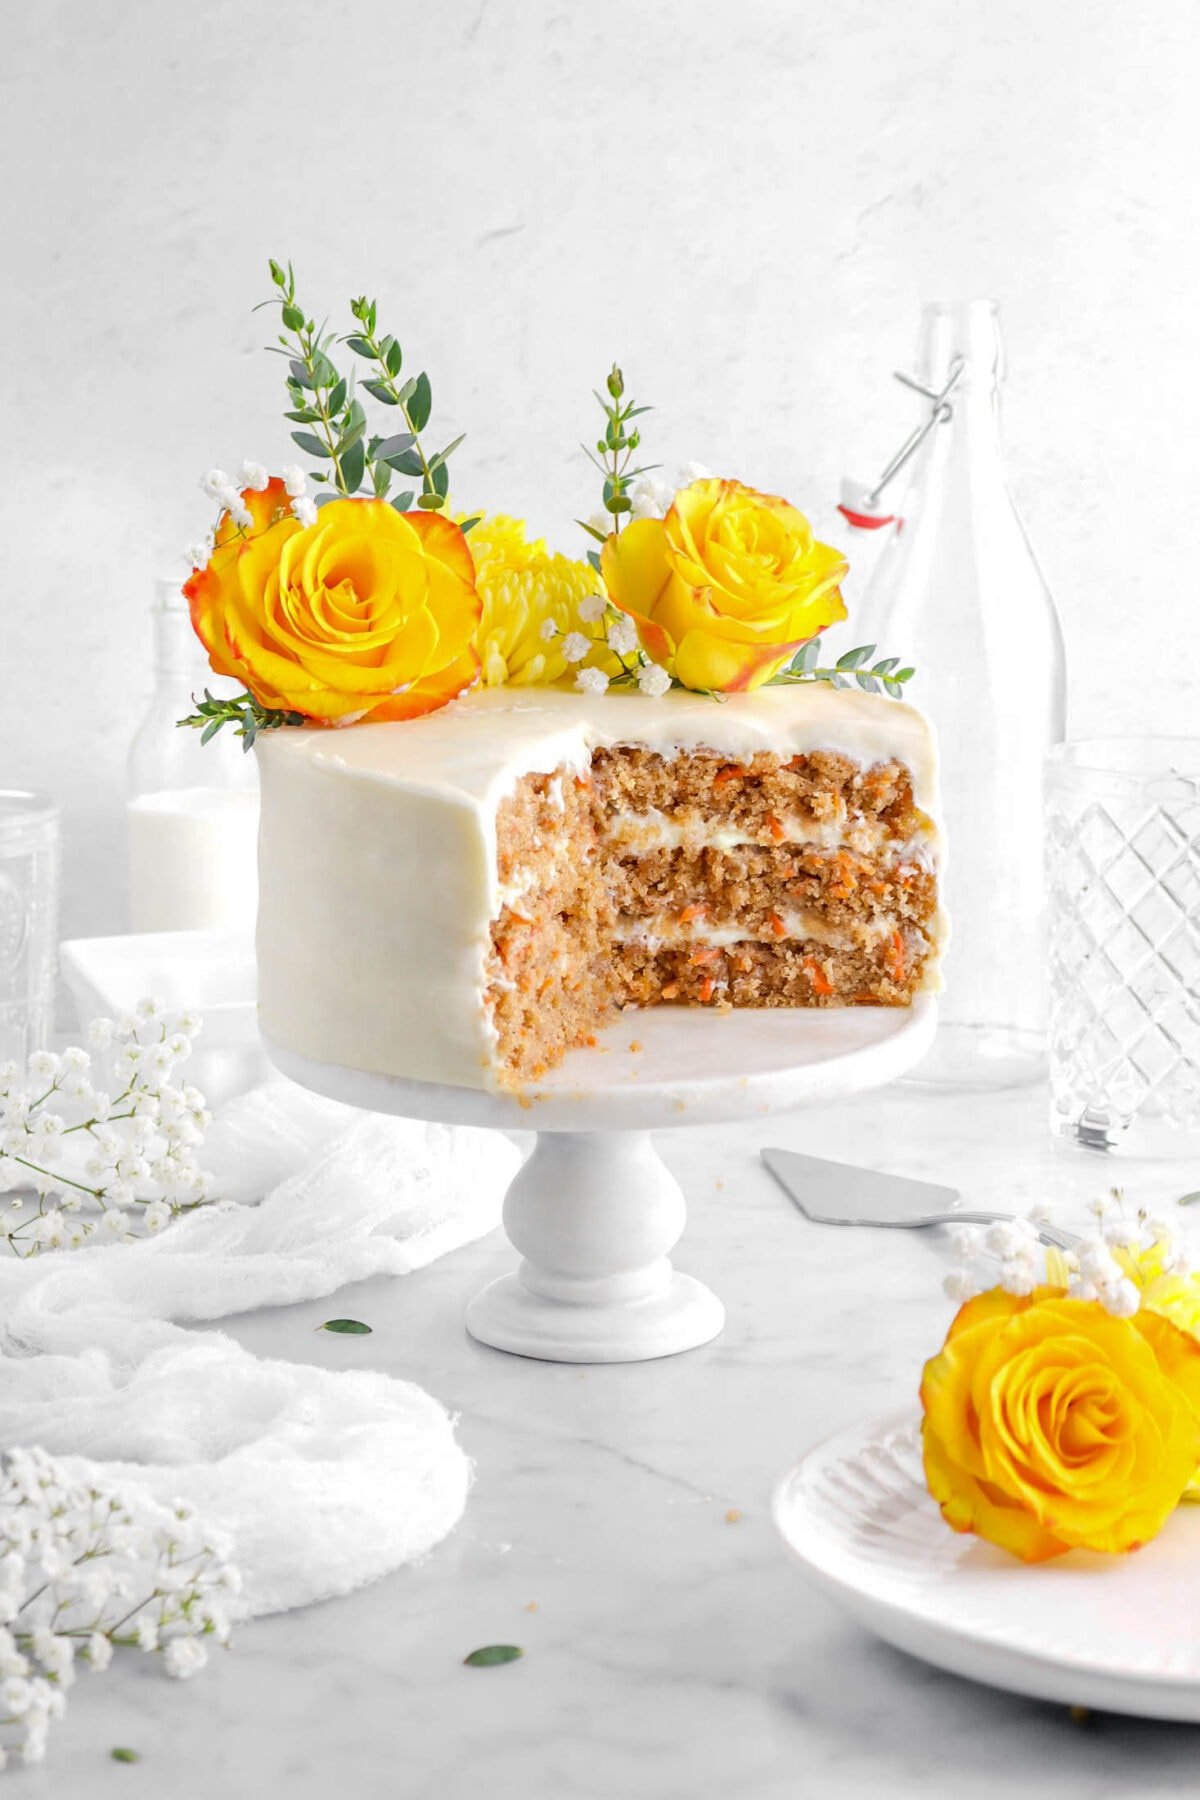 Spiced Carrot Cake with Cream Cheese Frosting